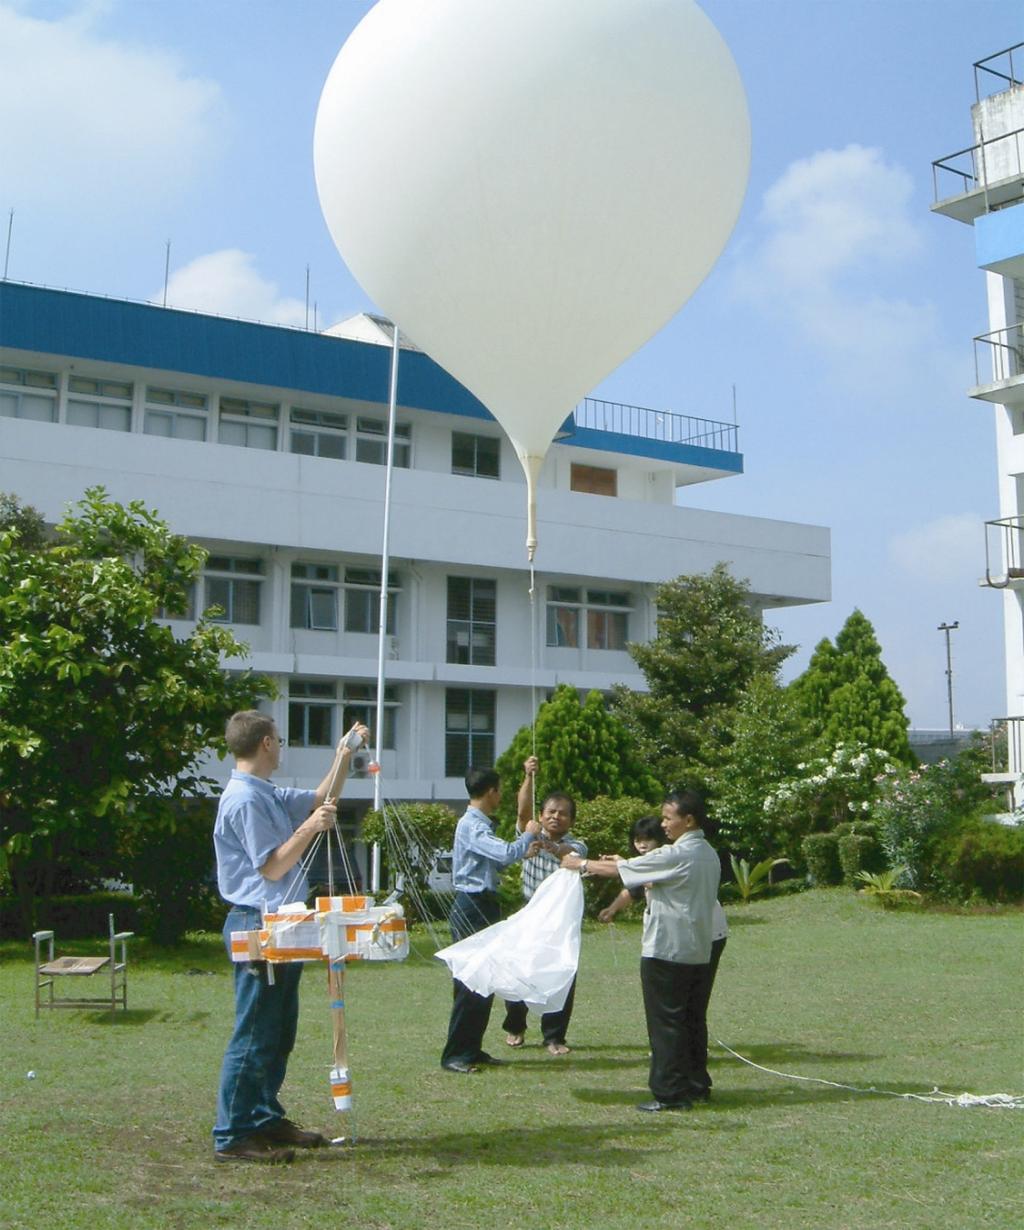 Balloon borne observations for